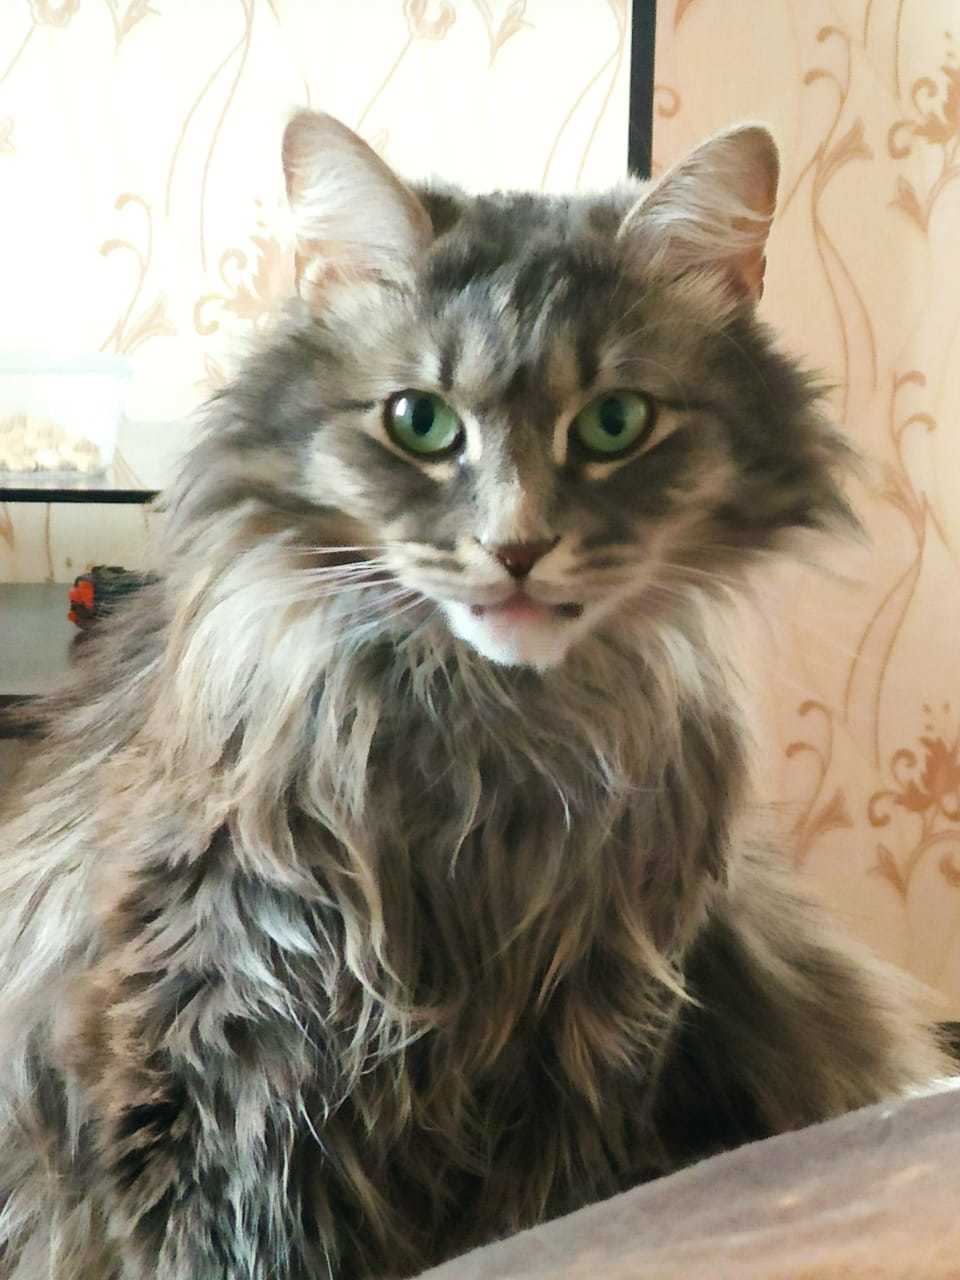 The cat is missing! Vladimir region: SNT Diana, near the village of Kostino UPD Found - My, Lost cat, cat, No rating, Help, Longpost, Vladimir region, Lost